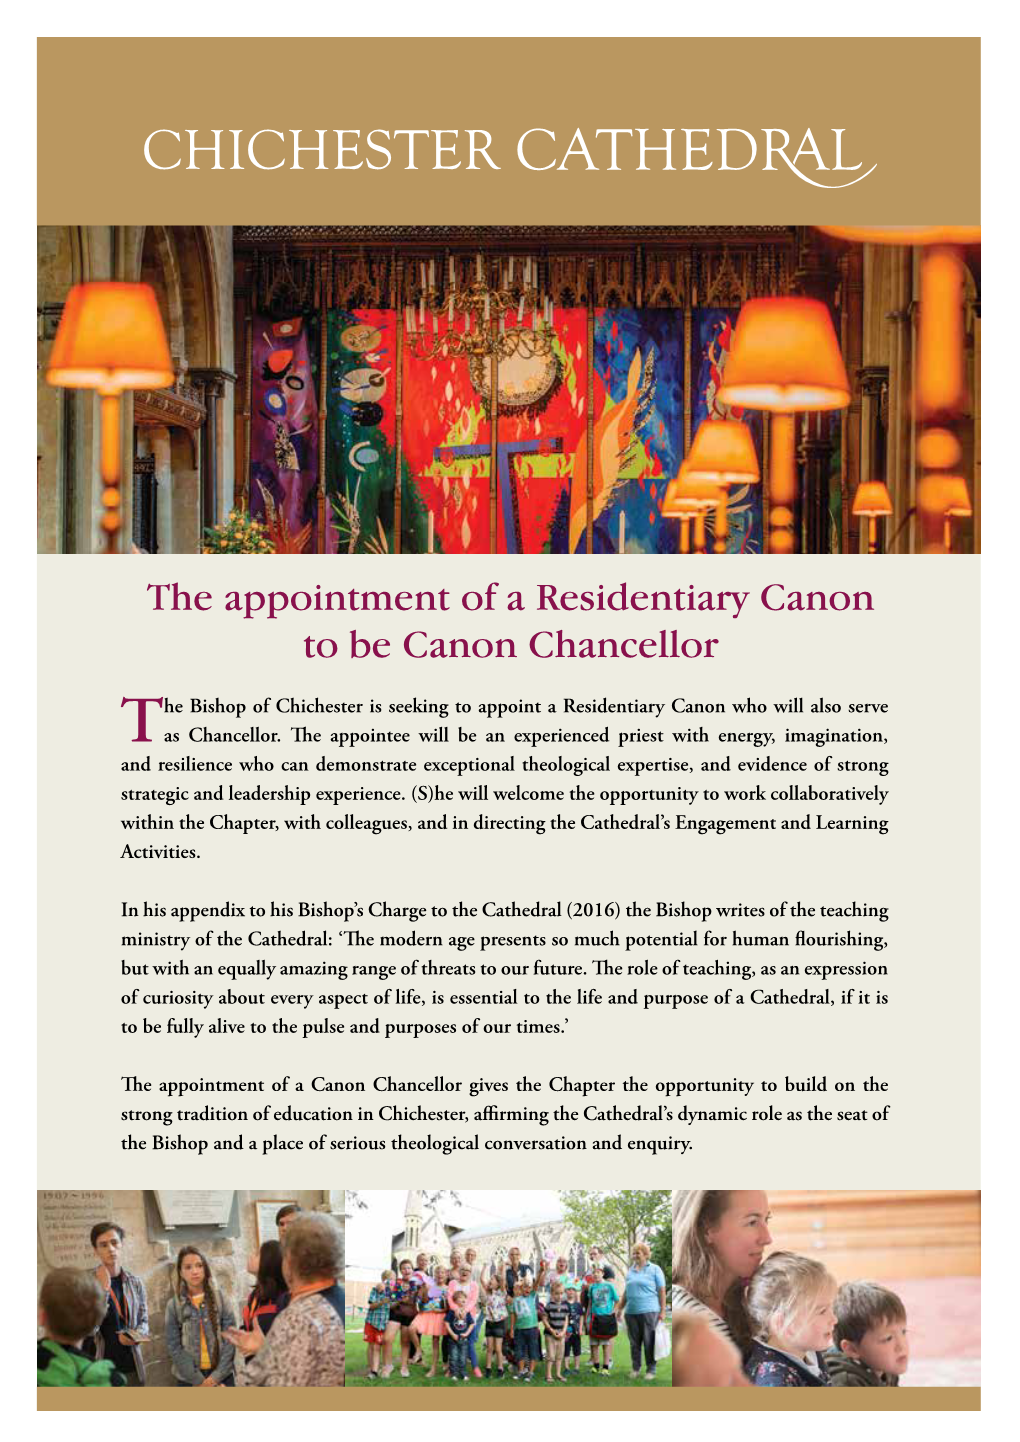 The Appointment of a Residentiary Canon to Be Canon Chancellor